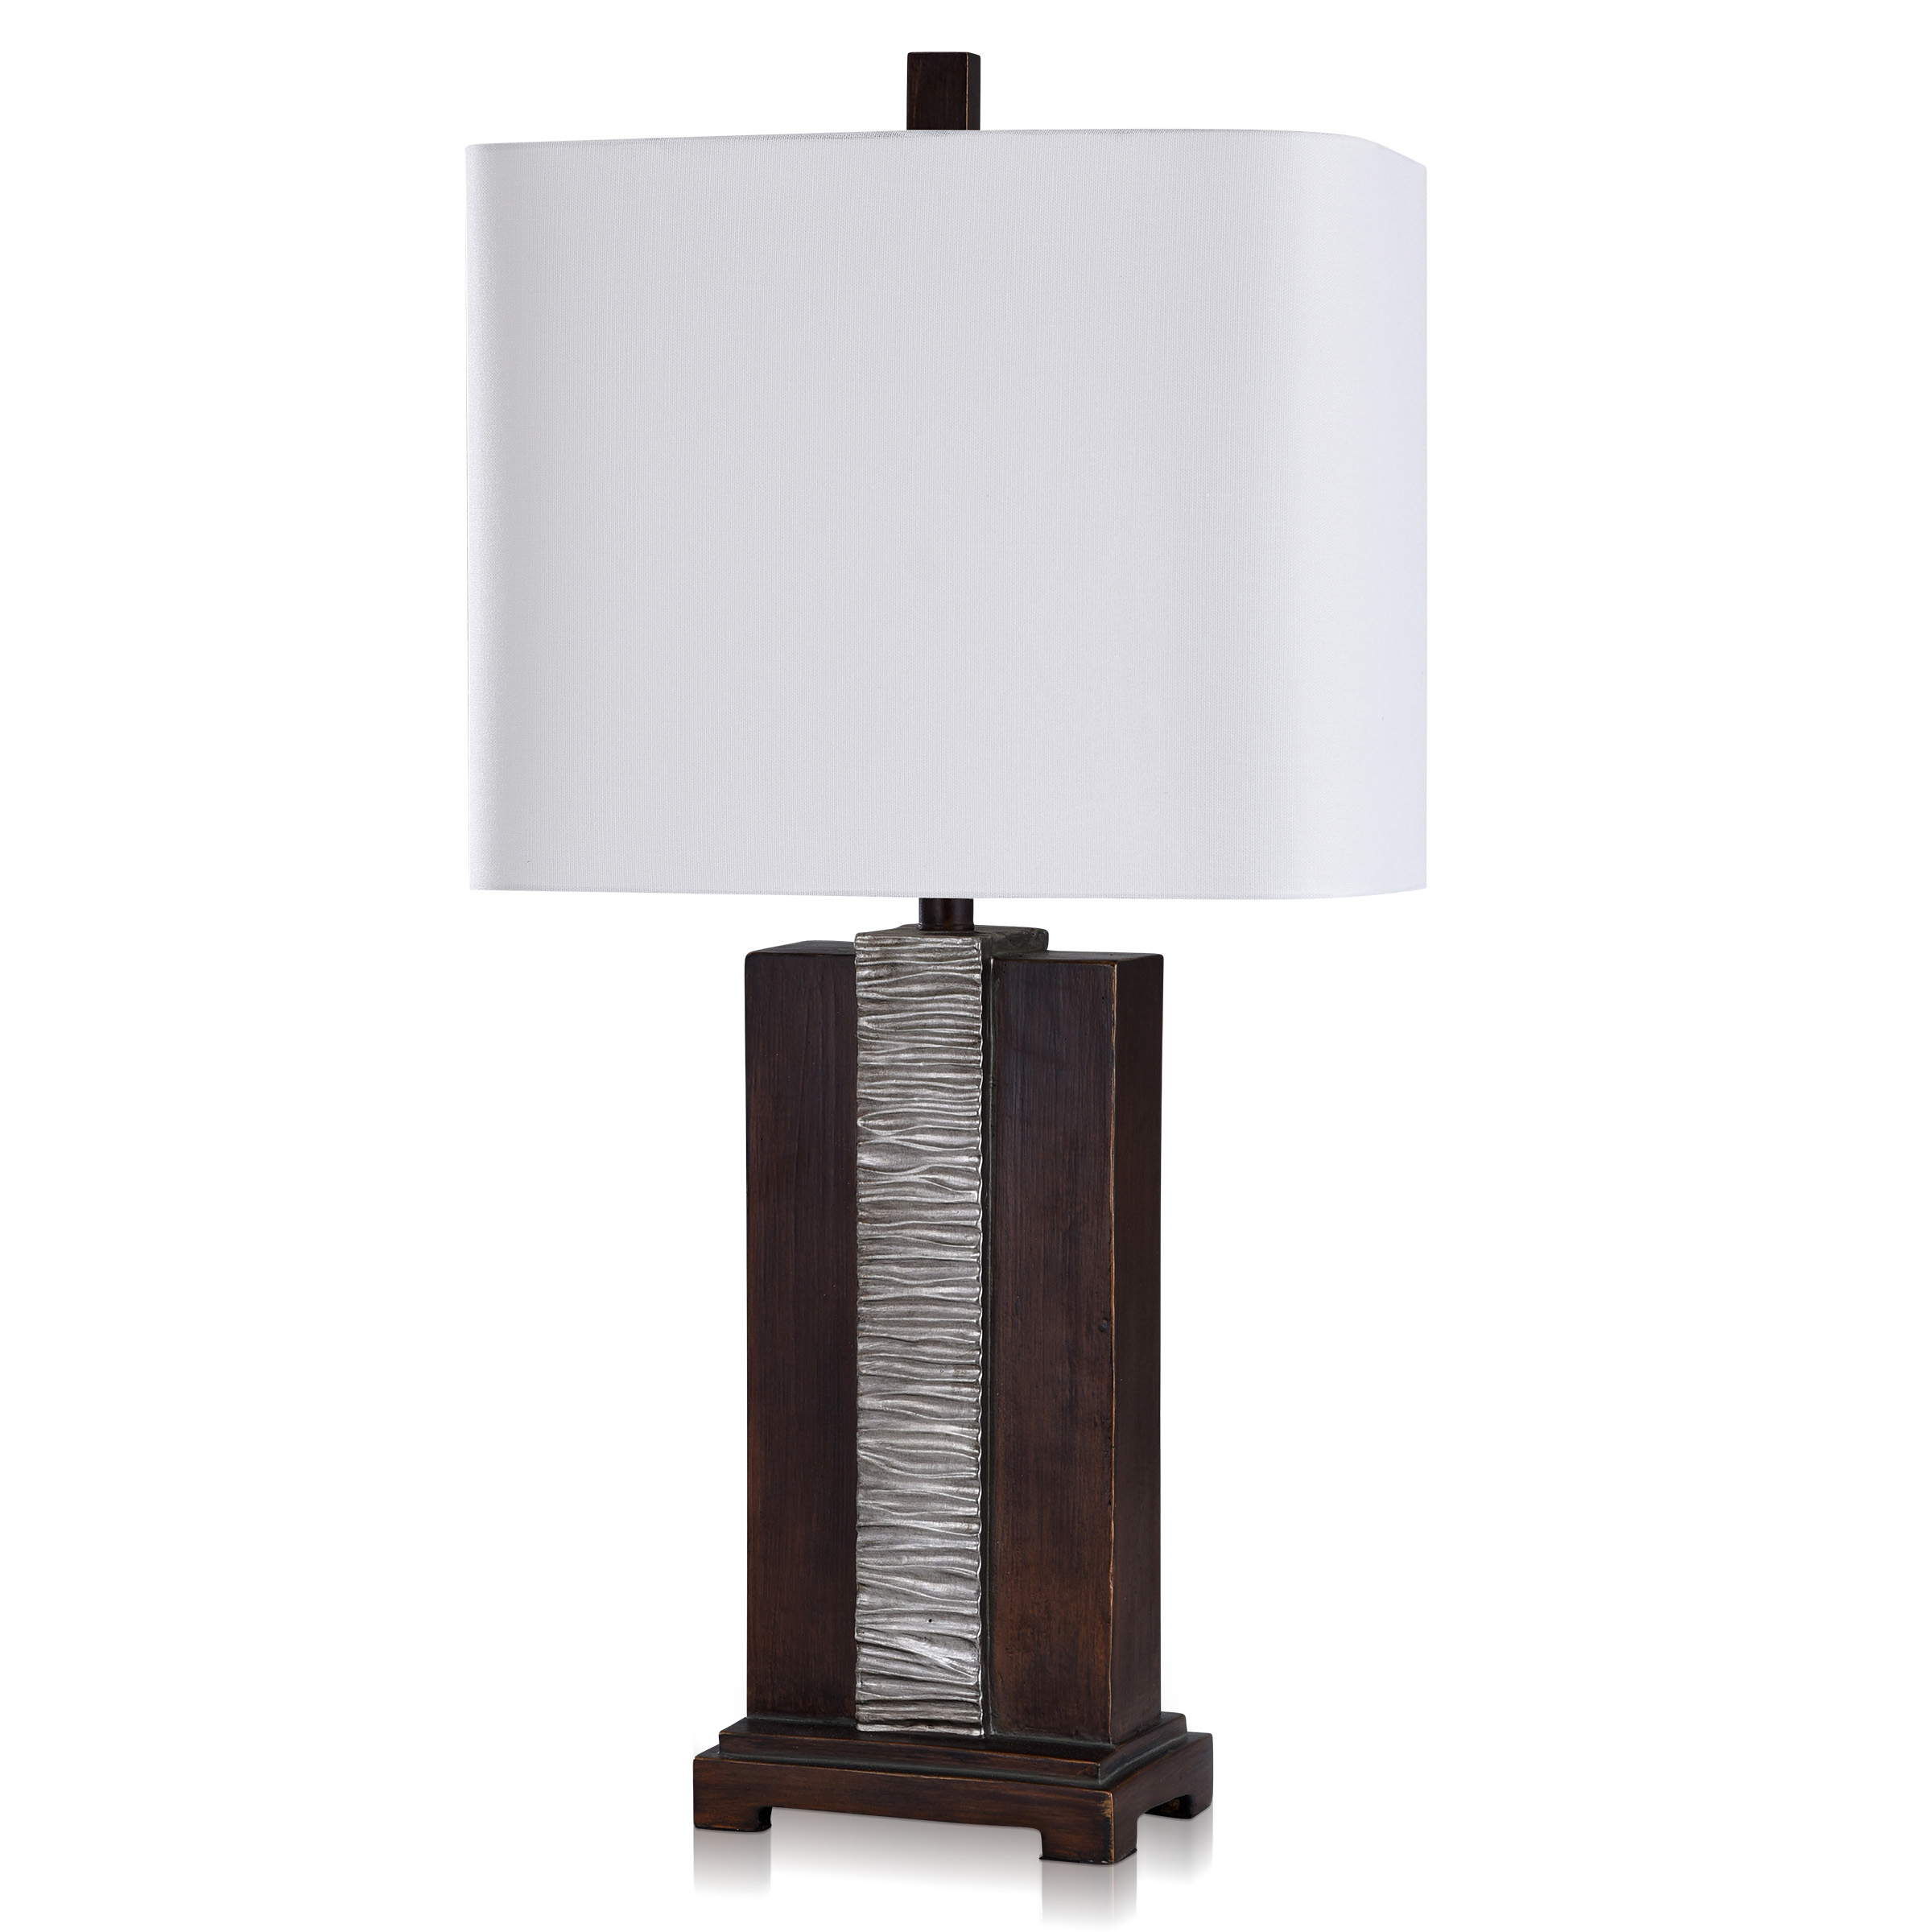 Owen -Transitional Waterfall Resin Table Lamp - Distressed Espresso, Silver Metallic - White Linen Shade - image 1 of 1